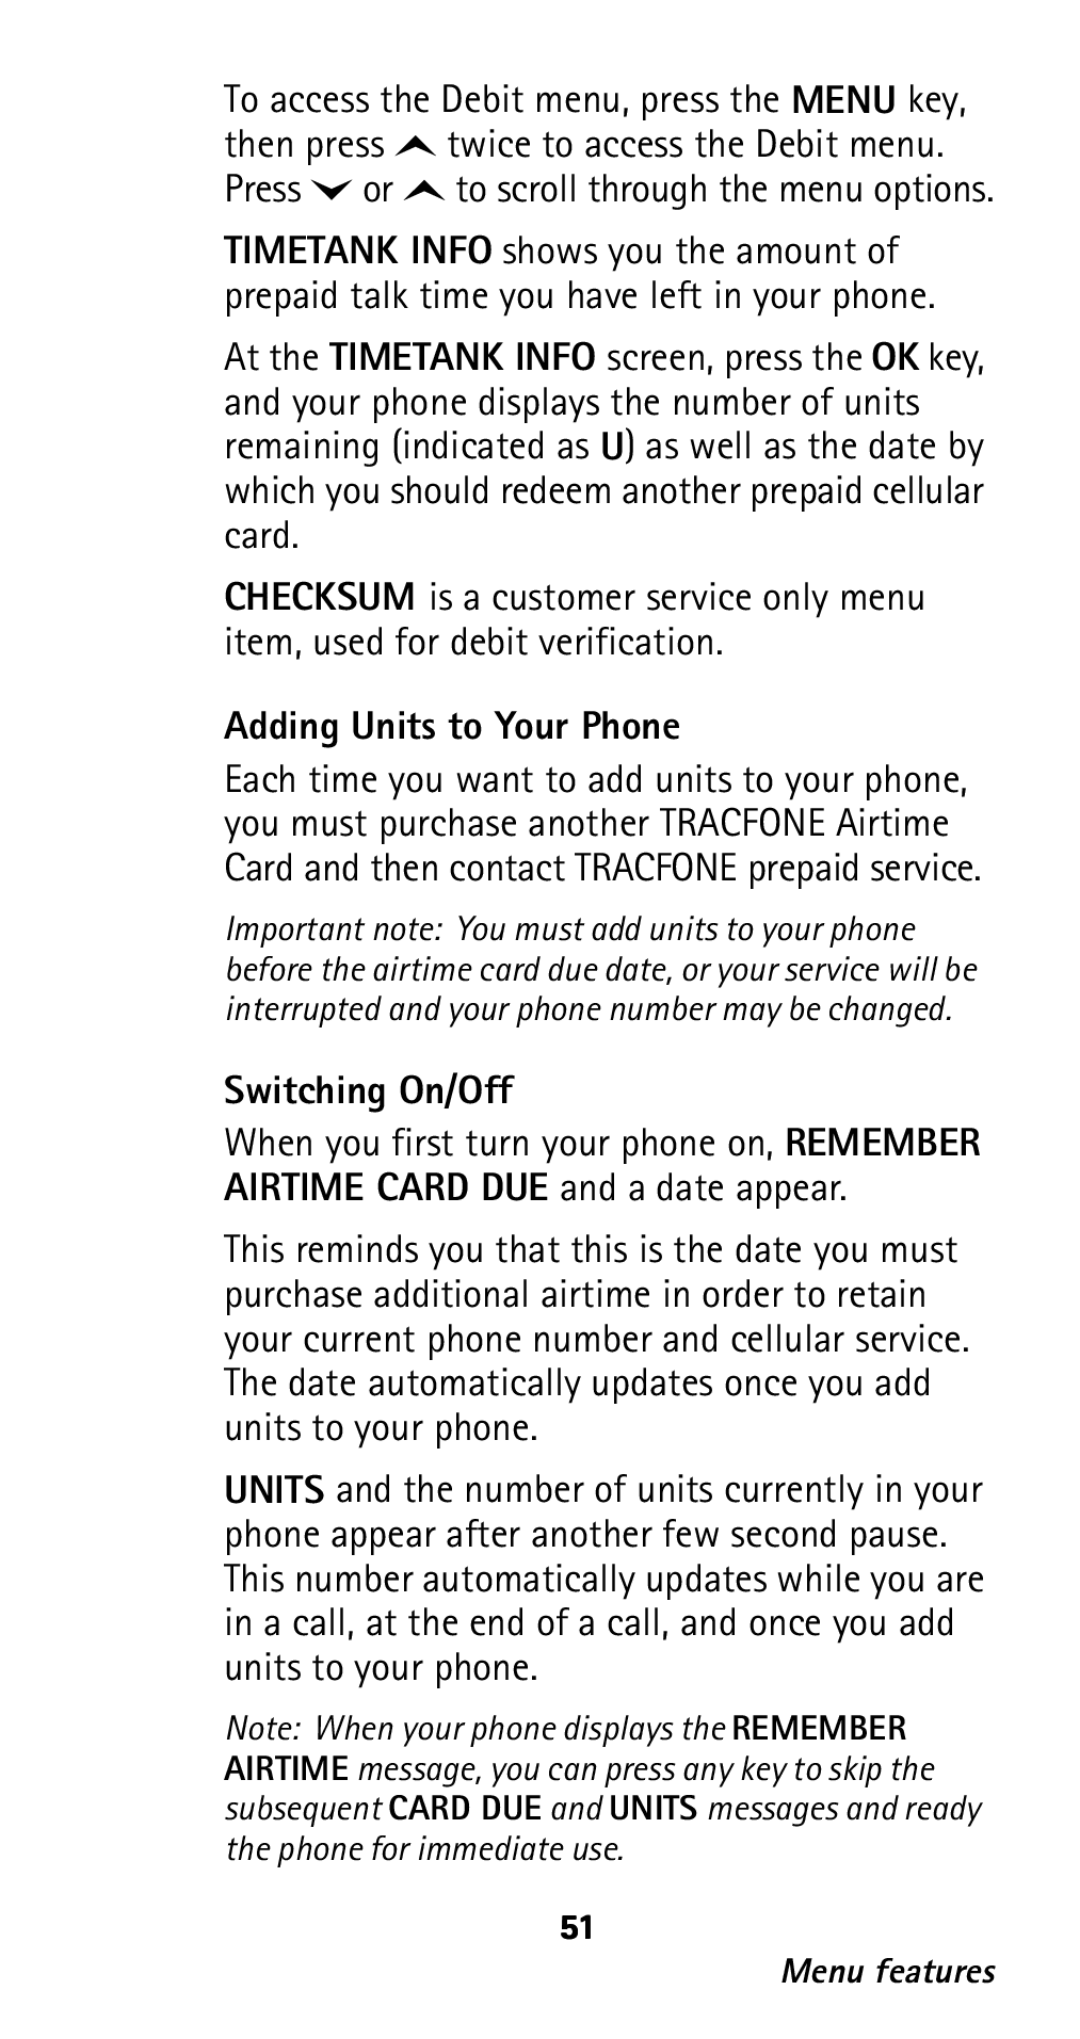 Nokia 282 owner manual Adding Units to Your Phone, Switching On/Off 